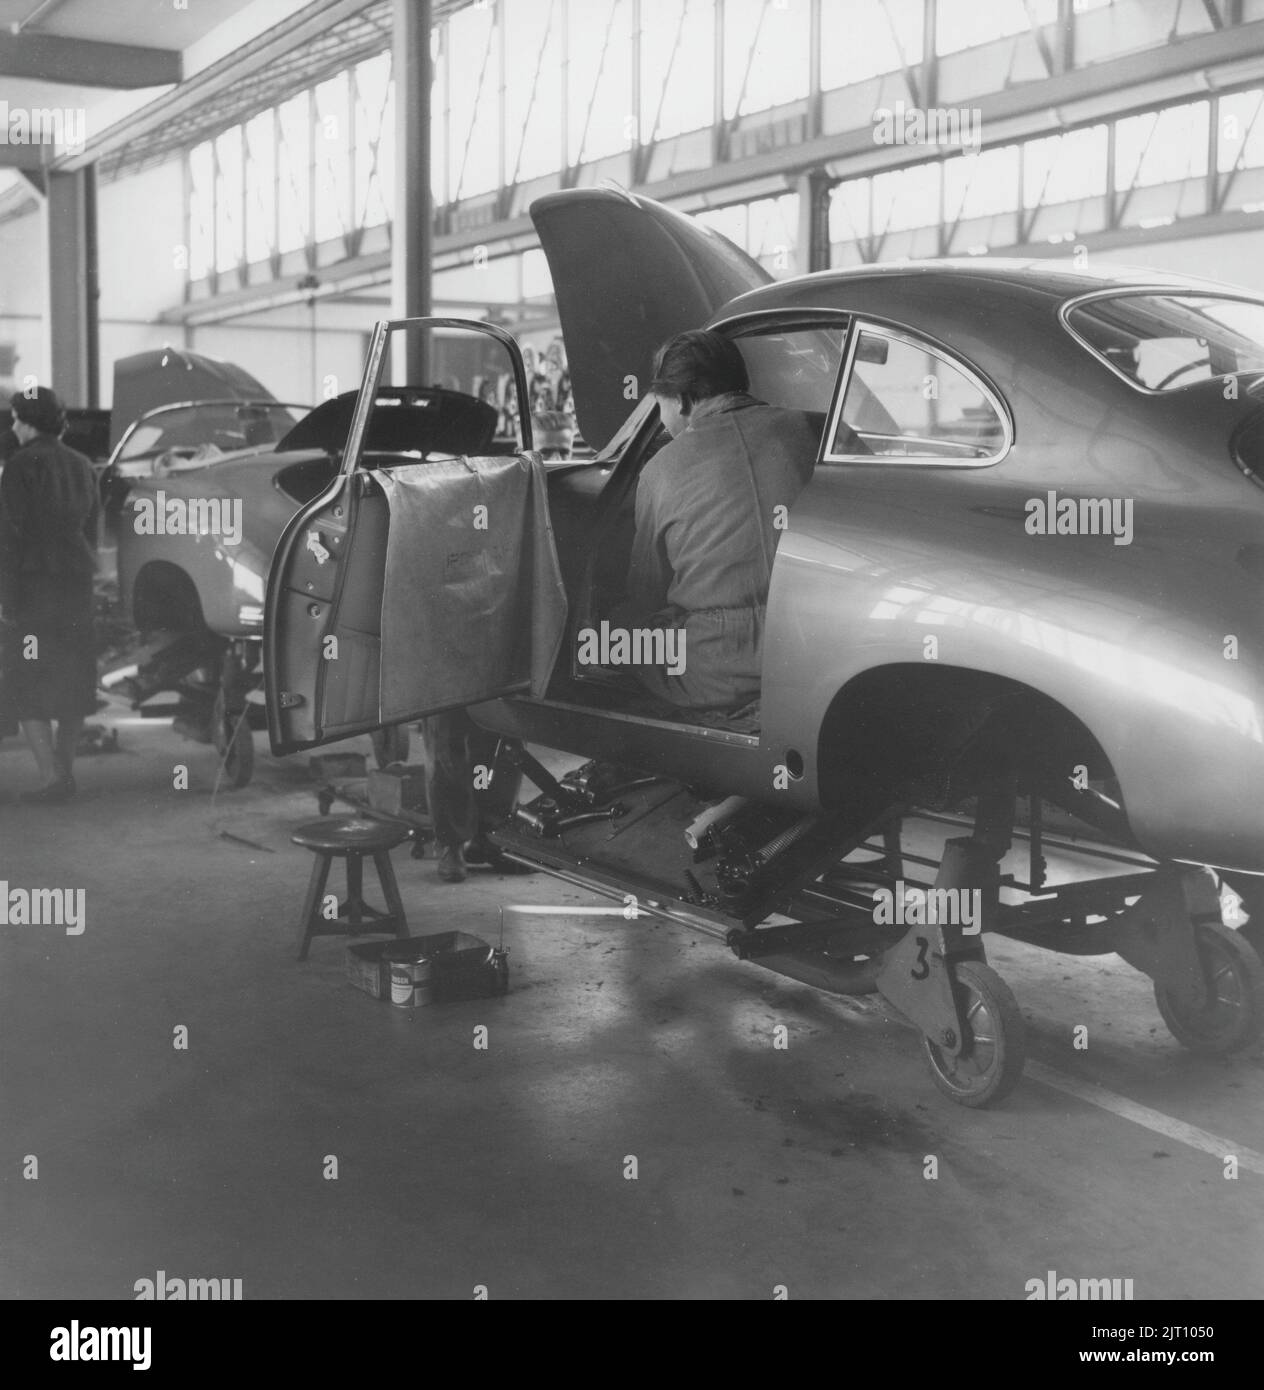 Porsche history. A rare view of the Porsche car factory in Stuttgart Germany in the 1950s. In the factory building Porsche cars is seen in different stages of production on a assembly line where workers are installing and putting the Porsche cars together. 1951. Stock Photo